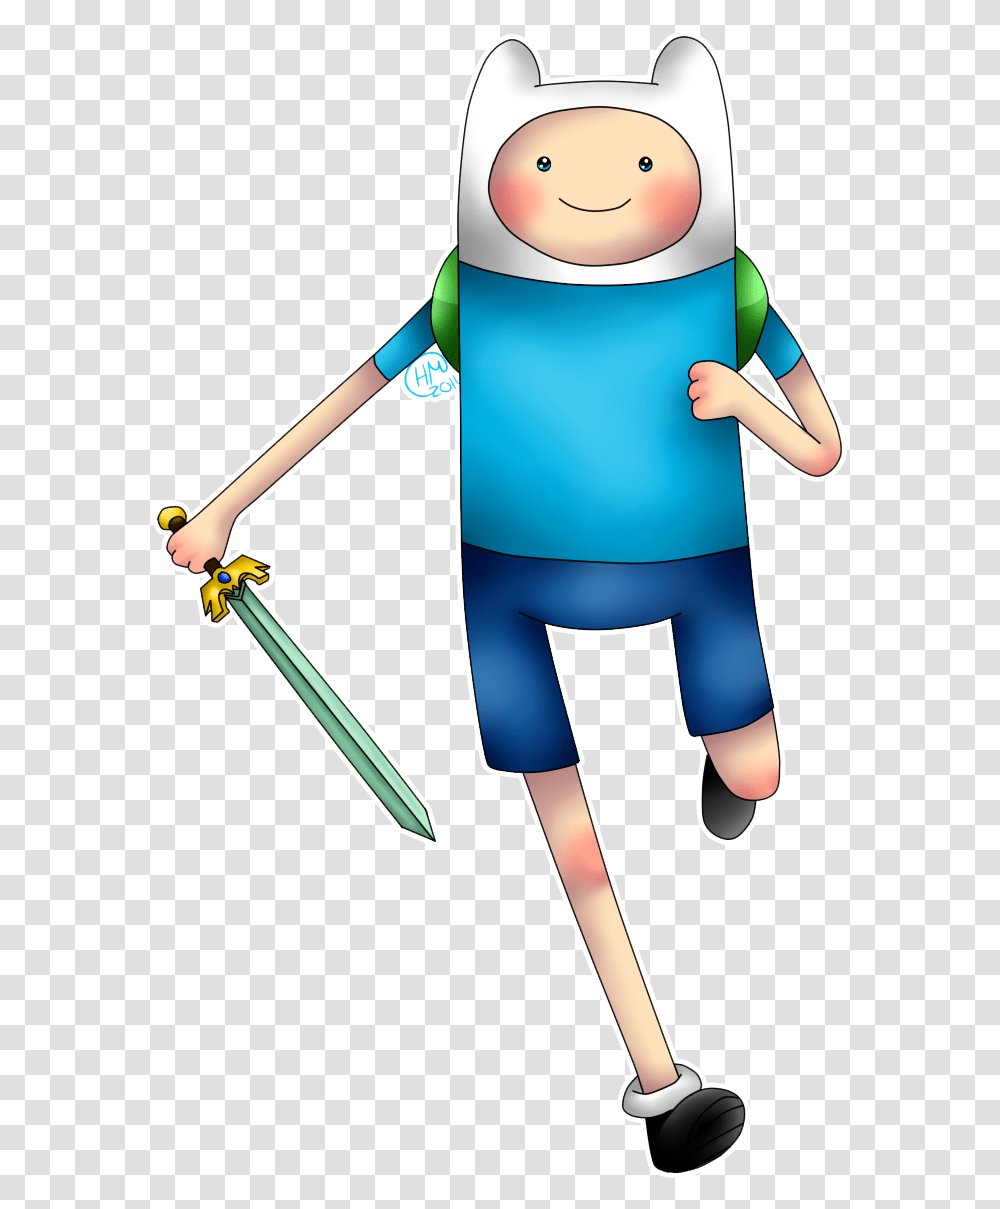 Download Finn Photo Finn The Human, Toy, Cleaning Transparent Png